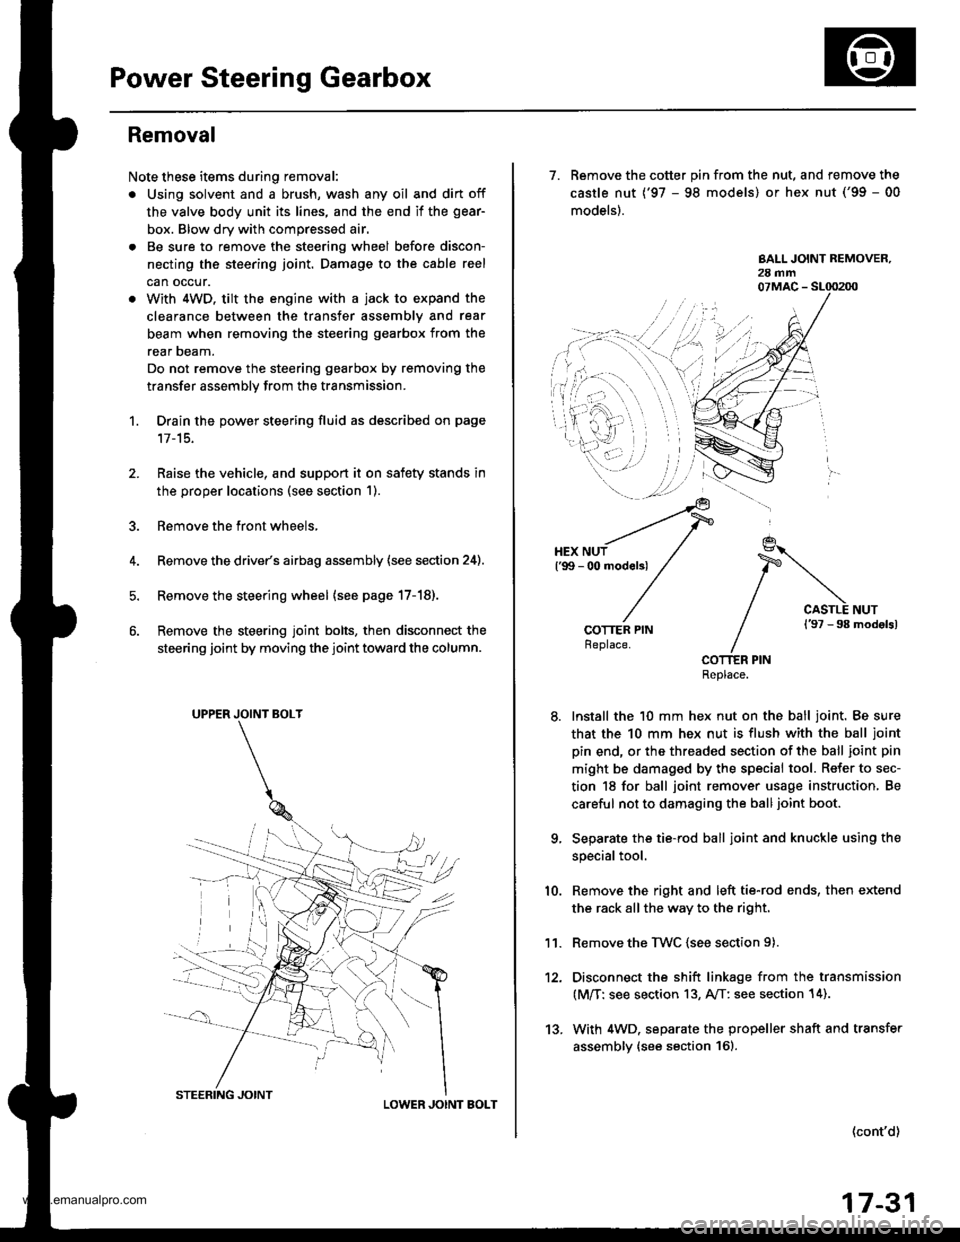 HONDA CR-V 2000 RD1-RD3 / 1.G User Guide 
Power Steering Gearbox
Removal
Note these items during removal:
. Using solvent and a brush, wash any oil and dirt off
the valve body unit its lines, and the end if the gear-
box. Blow dry with compr